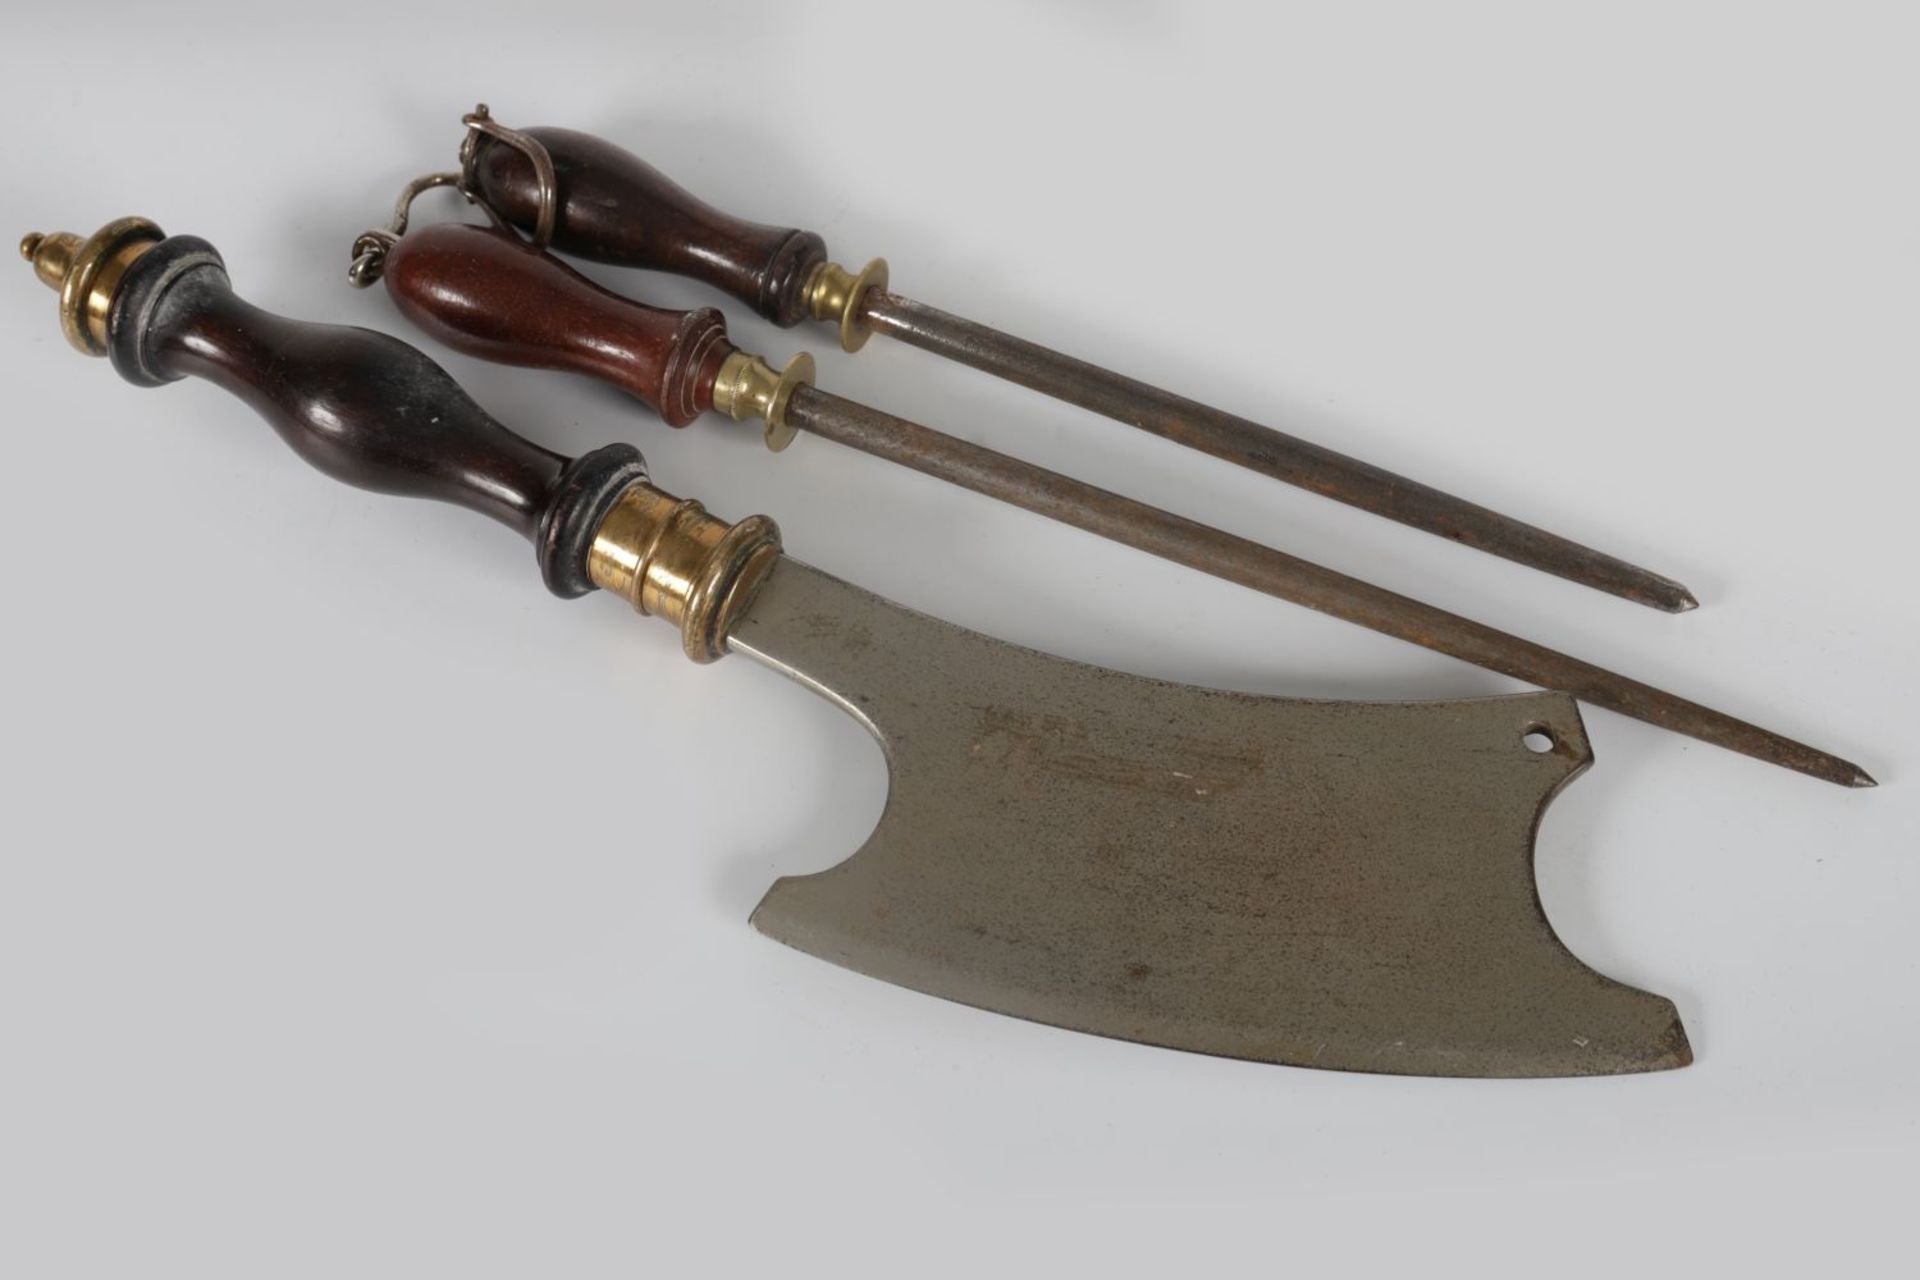 19TH-CENTURY BUTCHER'S AXE AND SHARPENERS